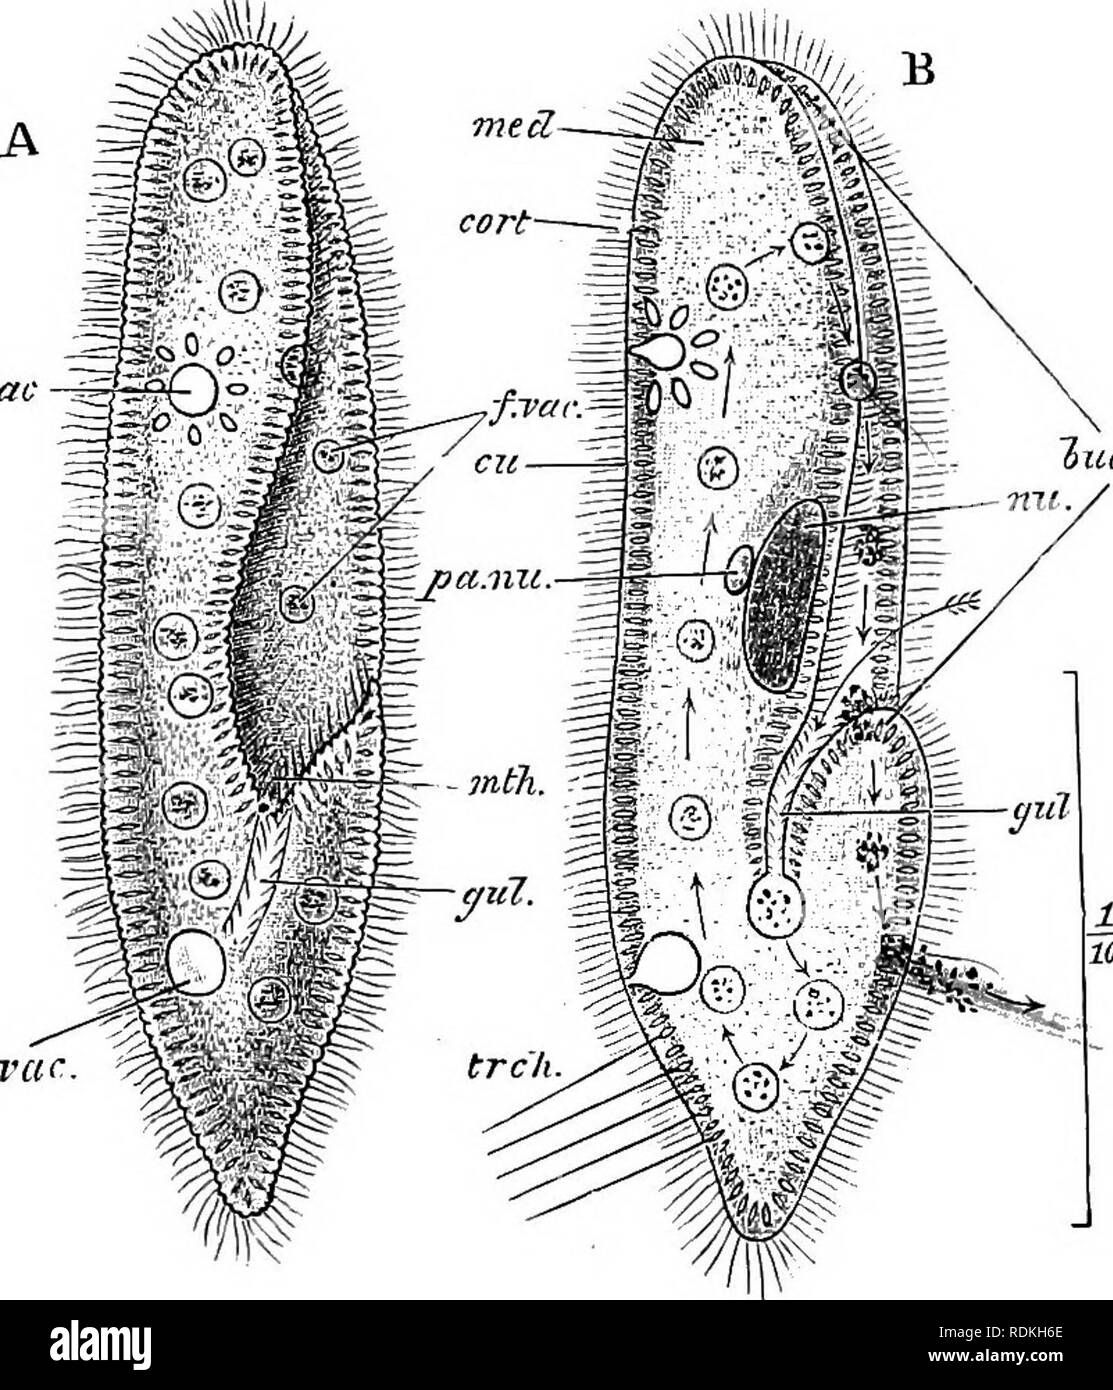 . The Cambridge natural history. Zoology. CILIATA 151 but its old nuclear apparatus is replaced by the fusion-nucleus. This new nucleus undergoes repeated fissions; its offspring enlarge unequally, the larger being differentiated as mega-, the smaller as micro-nuclei. The mates now separate (Fig. 52, F, G), and by the first (or subsequent) fission of each, the new mega- and micro-nuclei are distributed to the offspring. Colpidium colpoda. Tnic. ffT -^mm c.vac Fig. 55.—Paramecium caudatmn (Aspirotrichaceae). A, The living animal from the ventral aspect; B, the same in optical section, the arrow Stock Photo